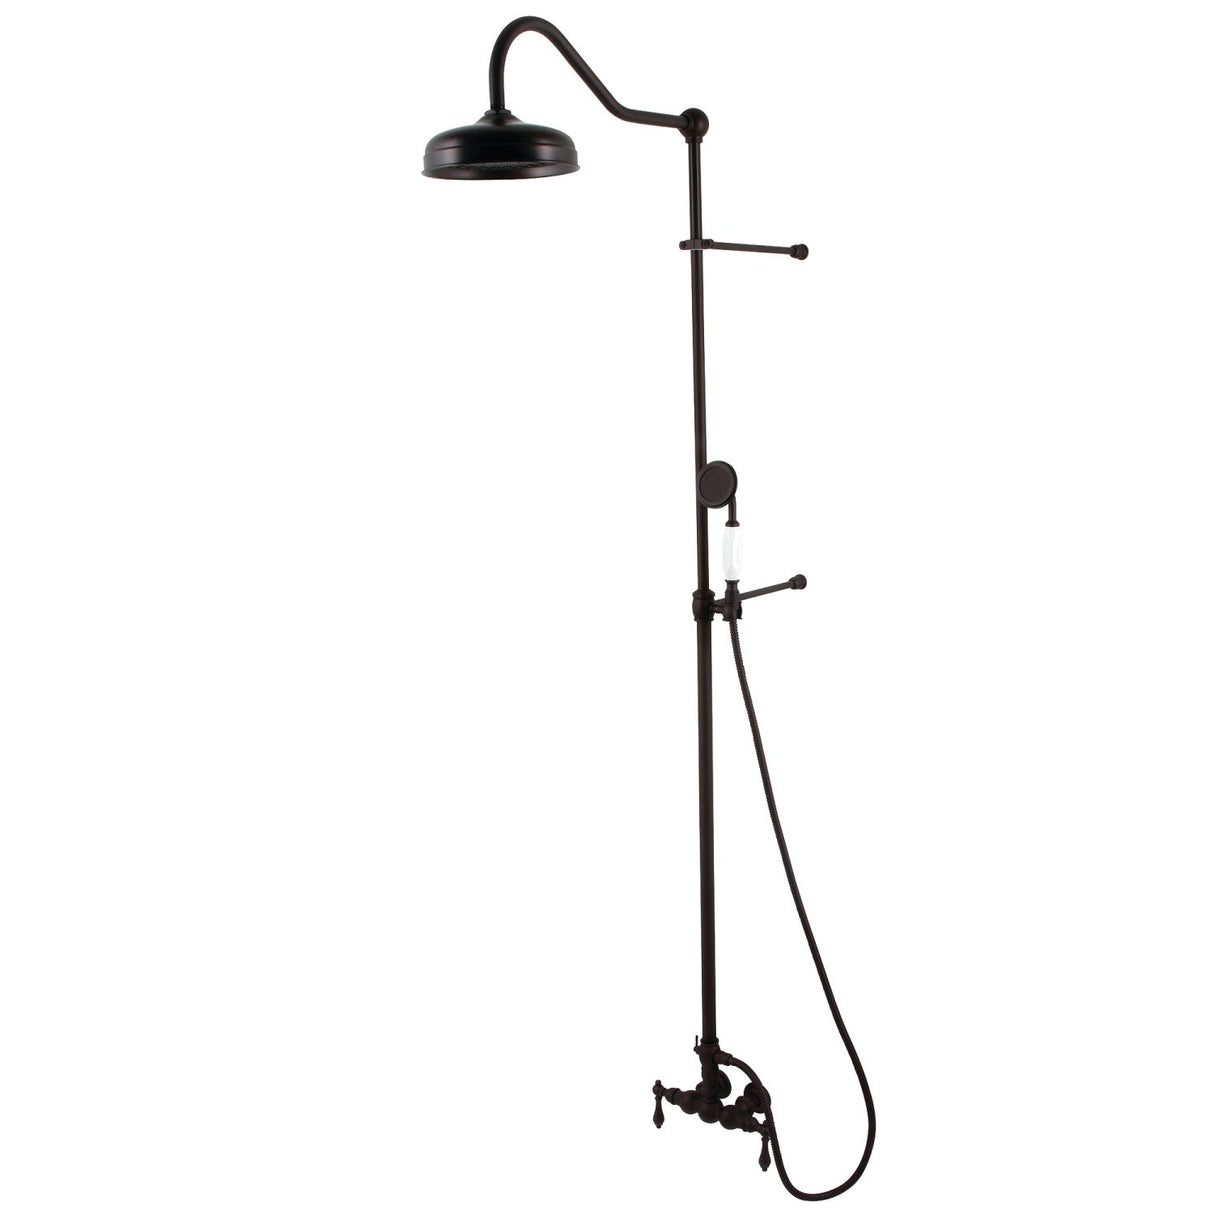 Vintage CCK6175 Tub Wall Mount Rain Drop Shower System with Hand Shower, Oil Rubbed Bronze